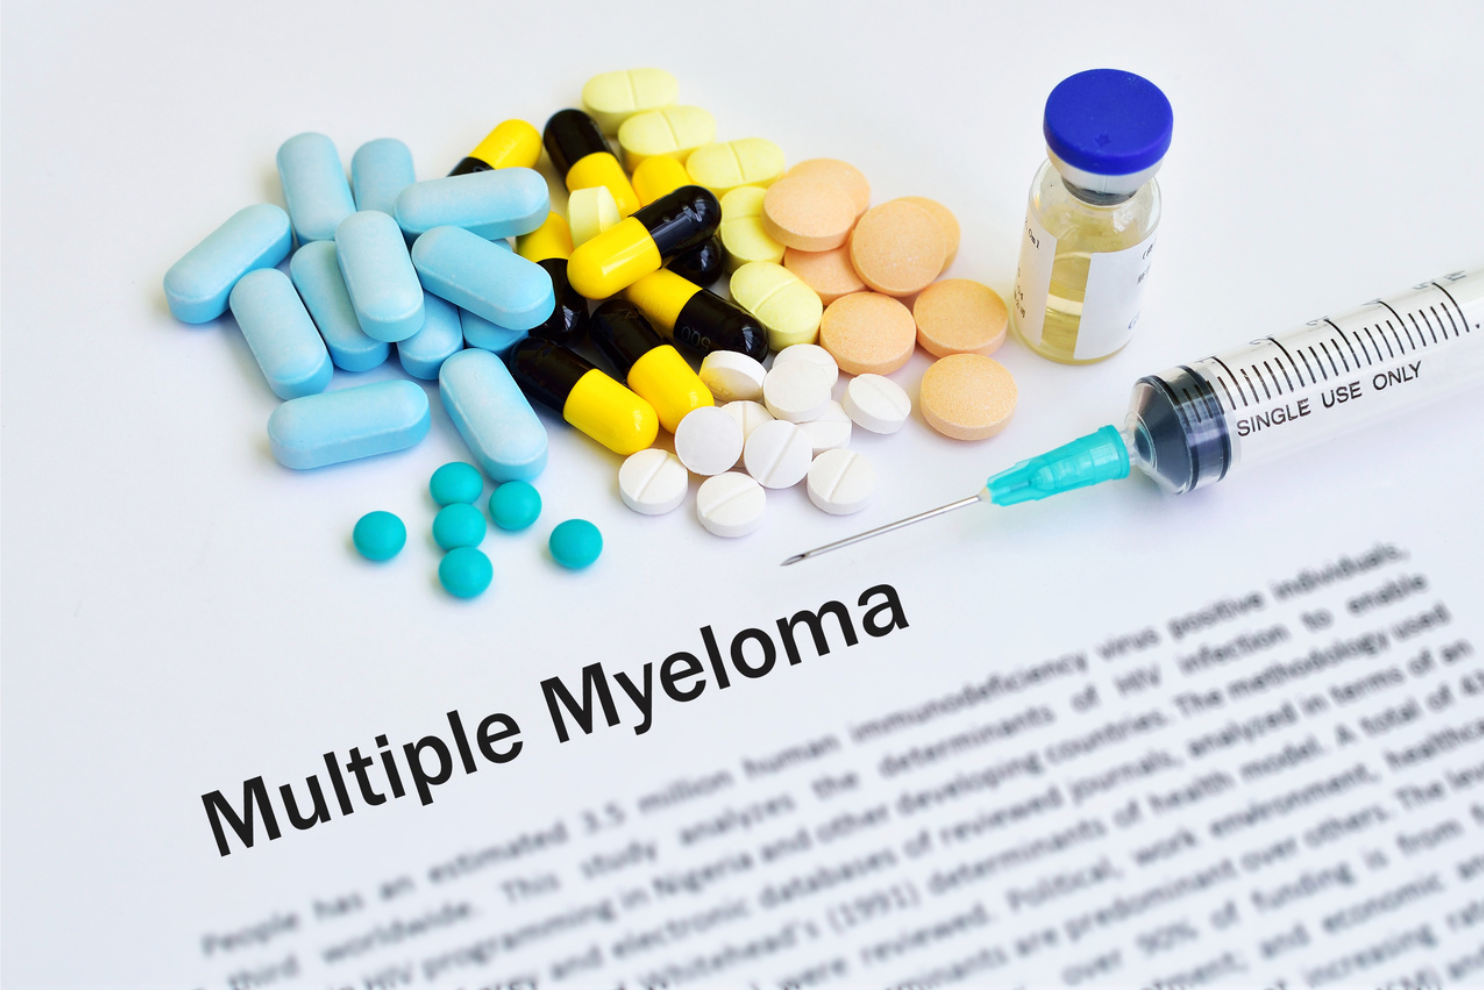 FDA Approves Daratumumab Triplet Combo for Relapsed/Refractory Multiple Myeloma